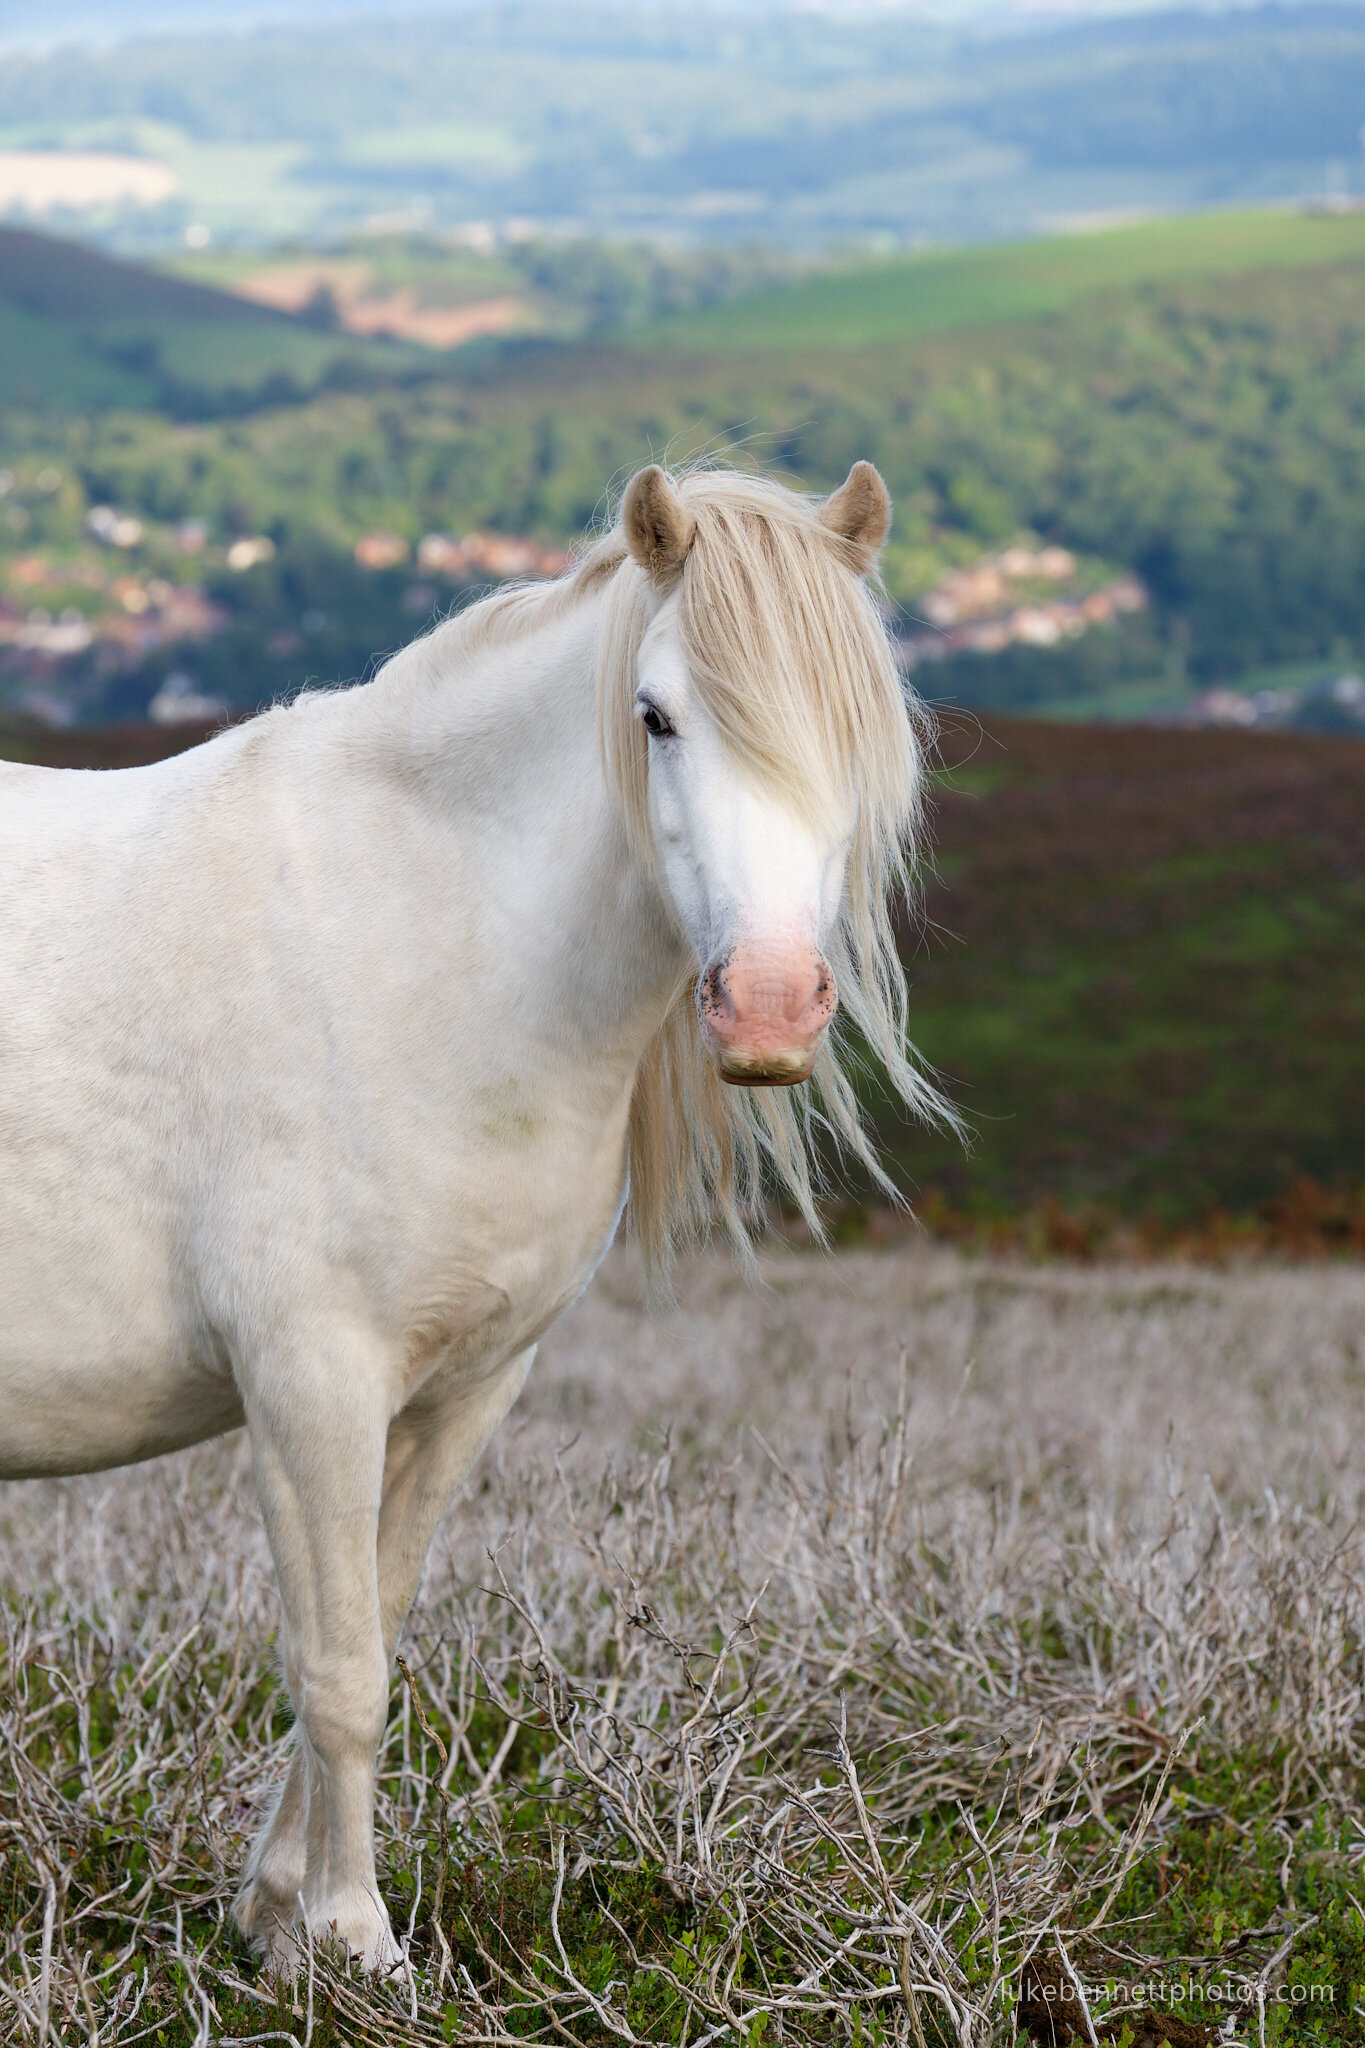  A wild Welsh pony posing for the camera, up on the Long Mynd in Shropshire.  www.lukebennettphotos.com 